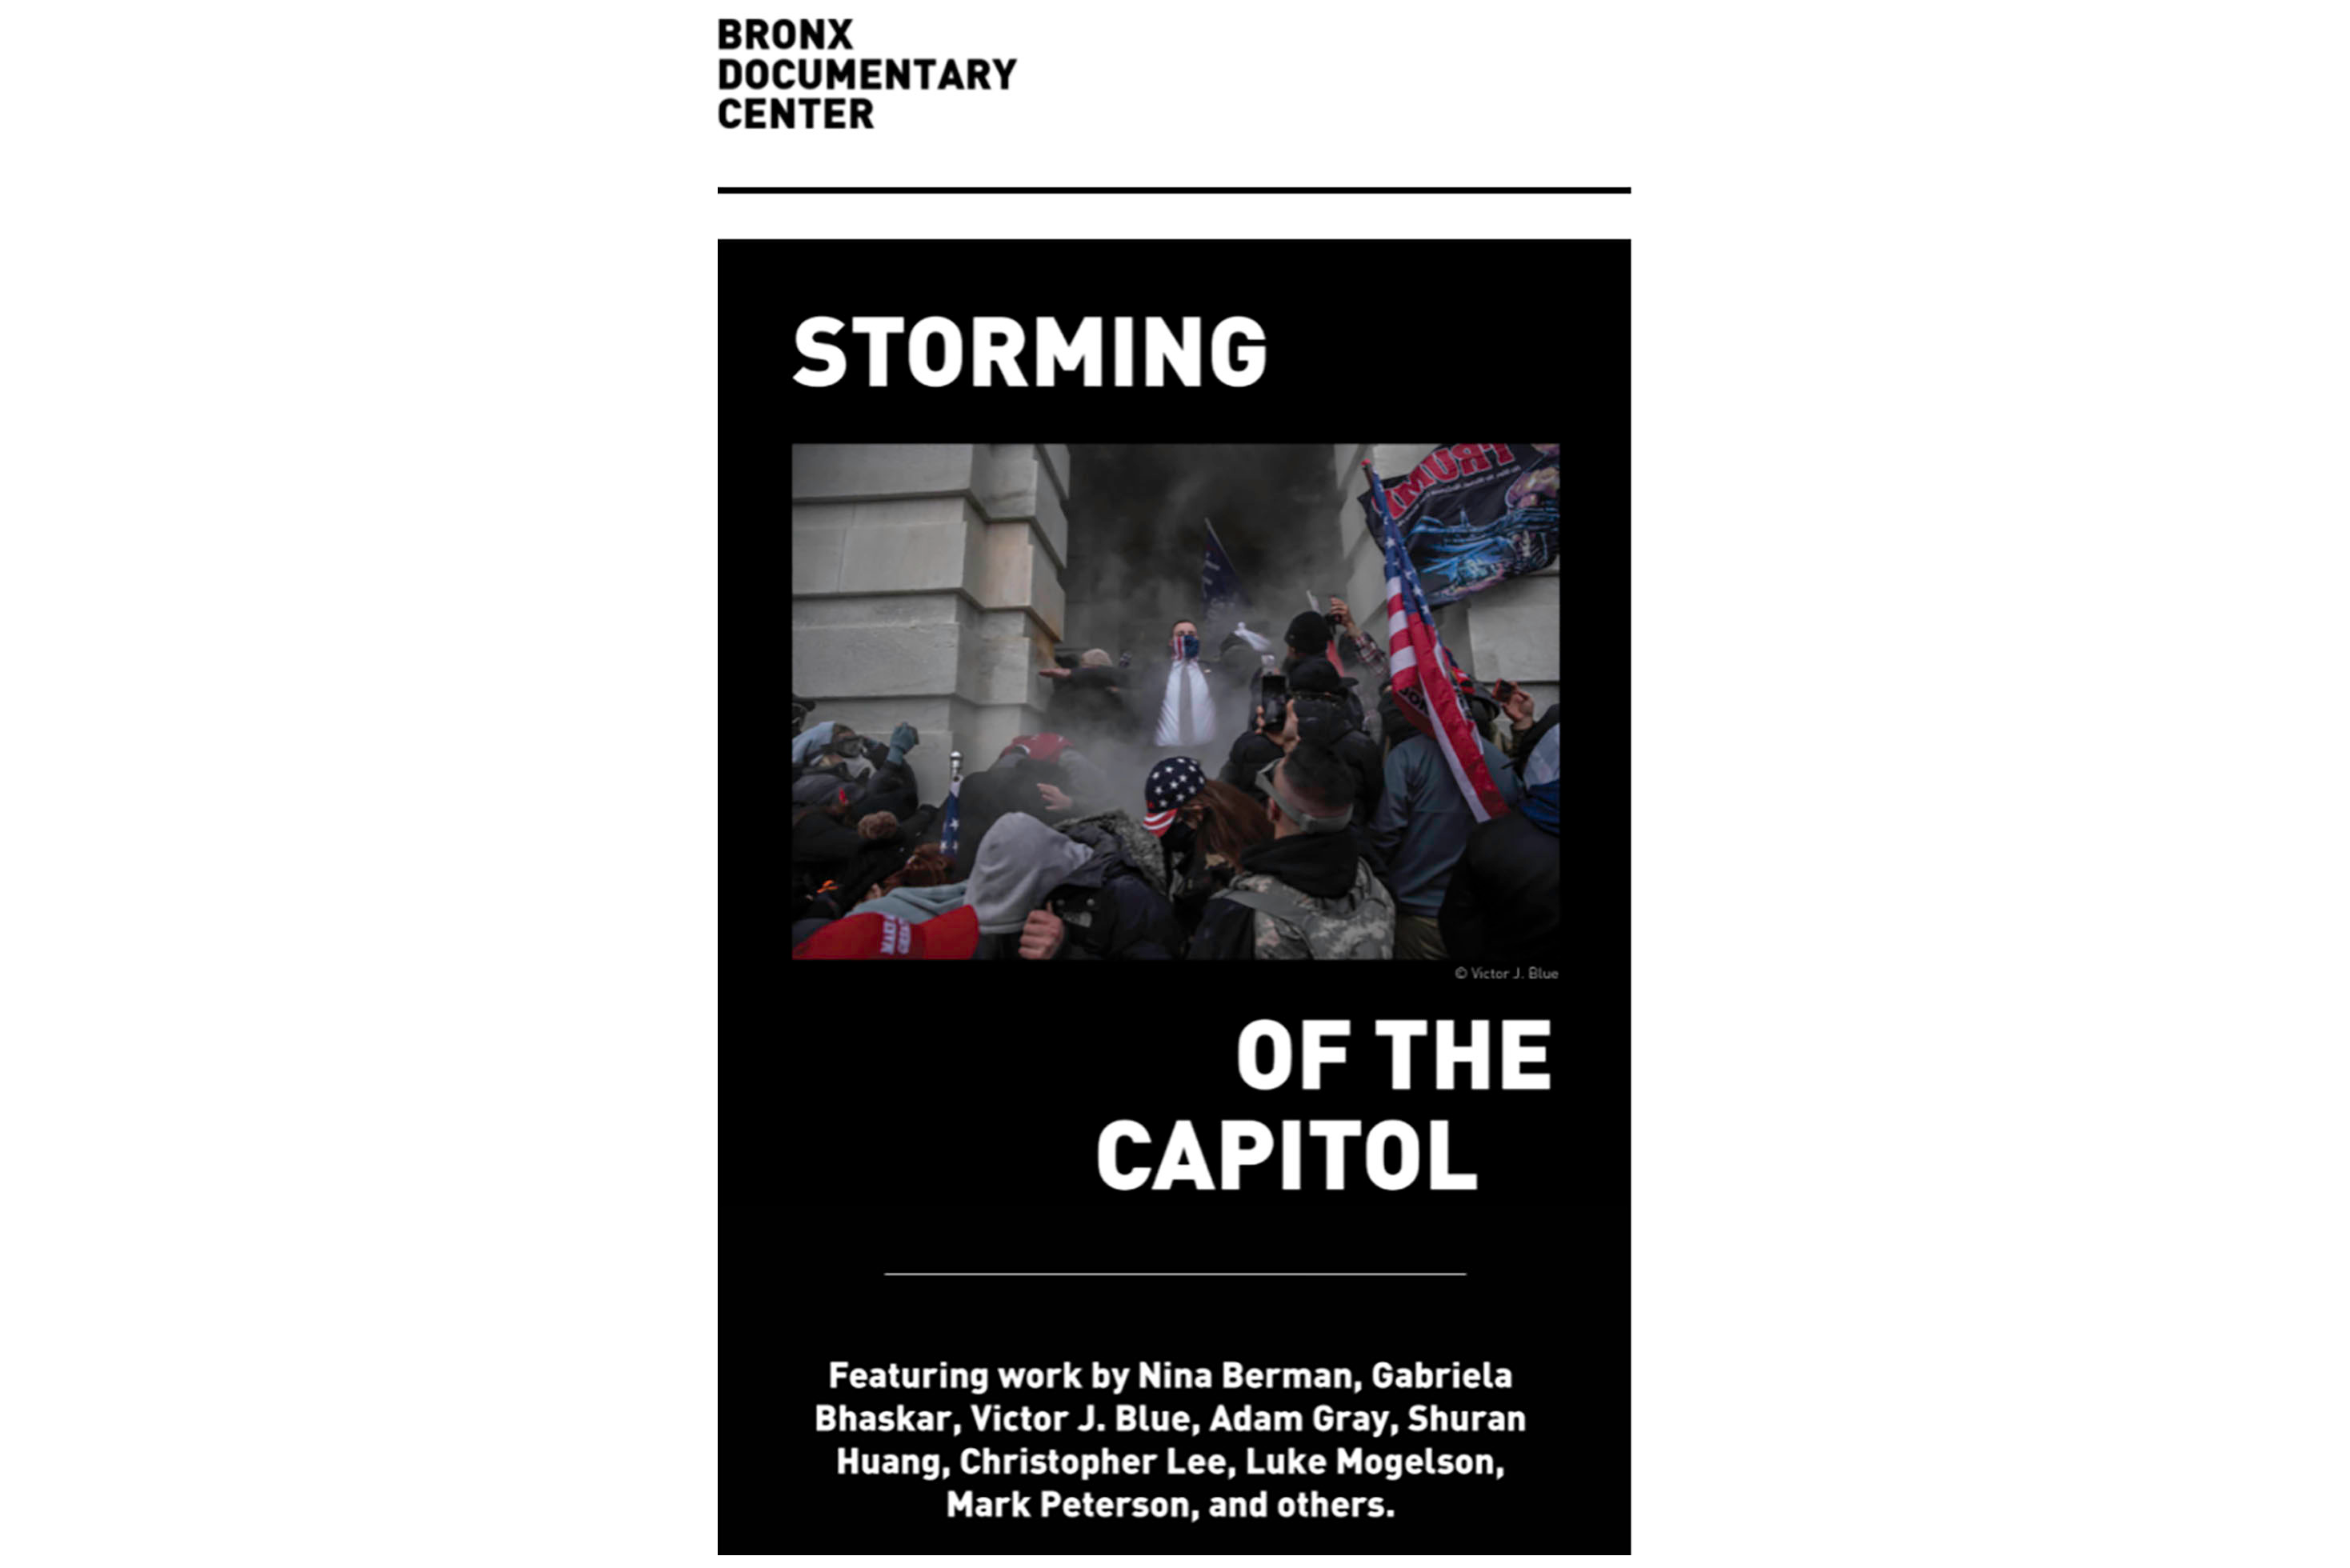 "Storming of the Capitol" Exhibition at Bronx Documentary Center